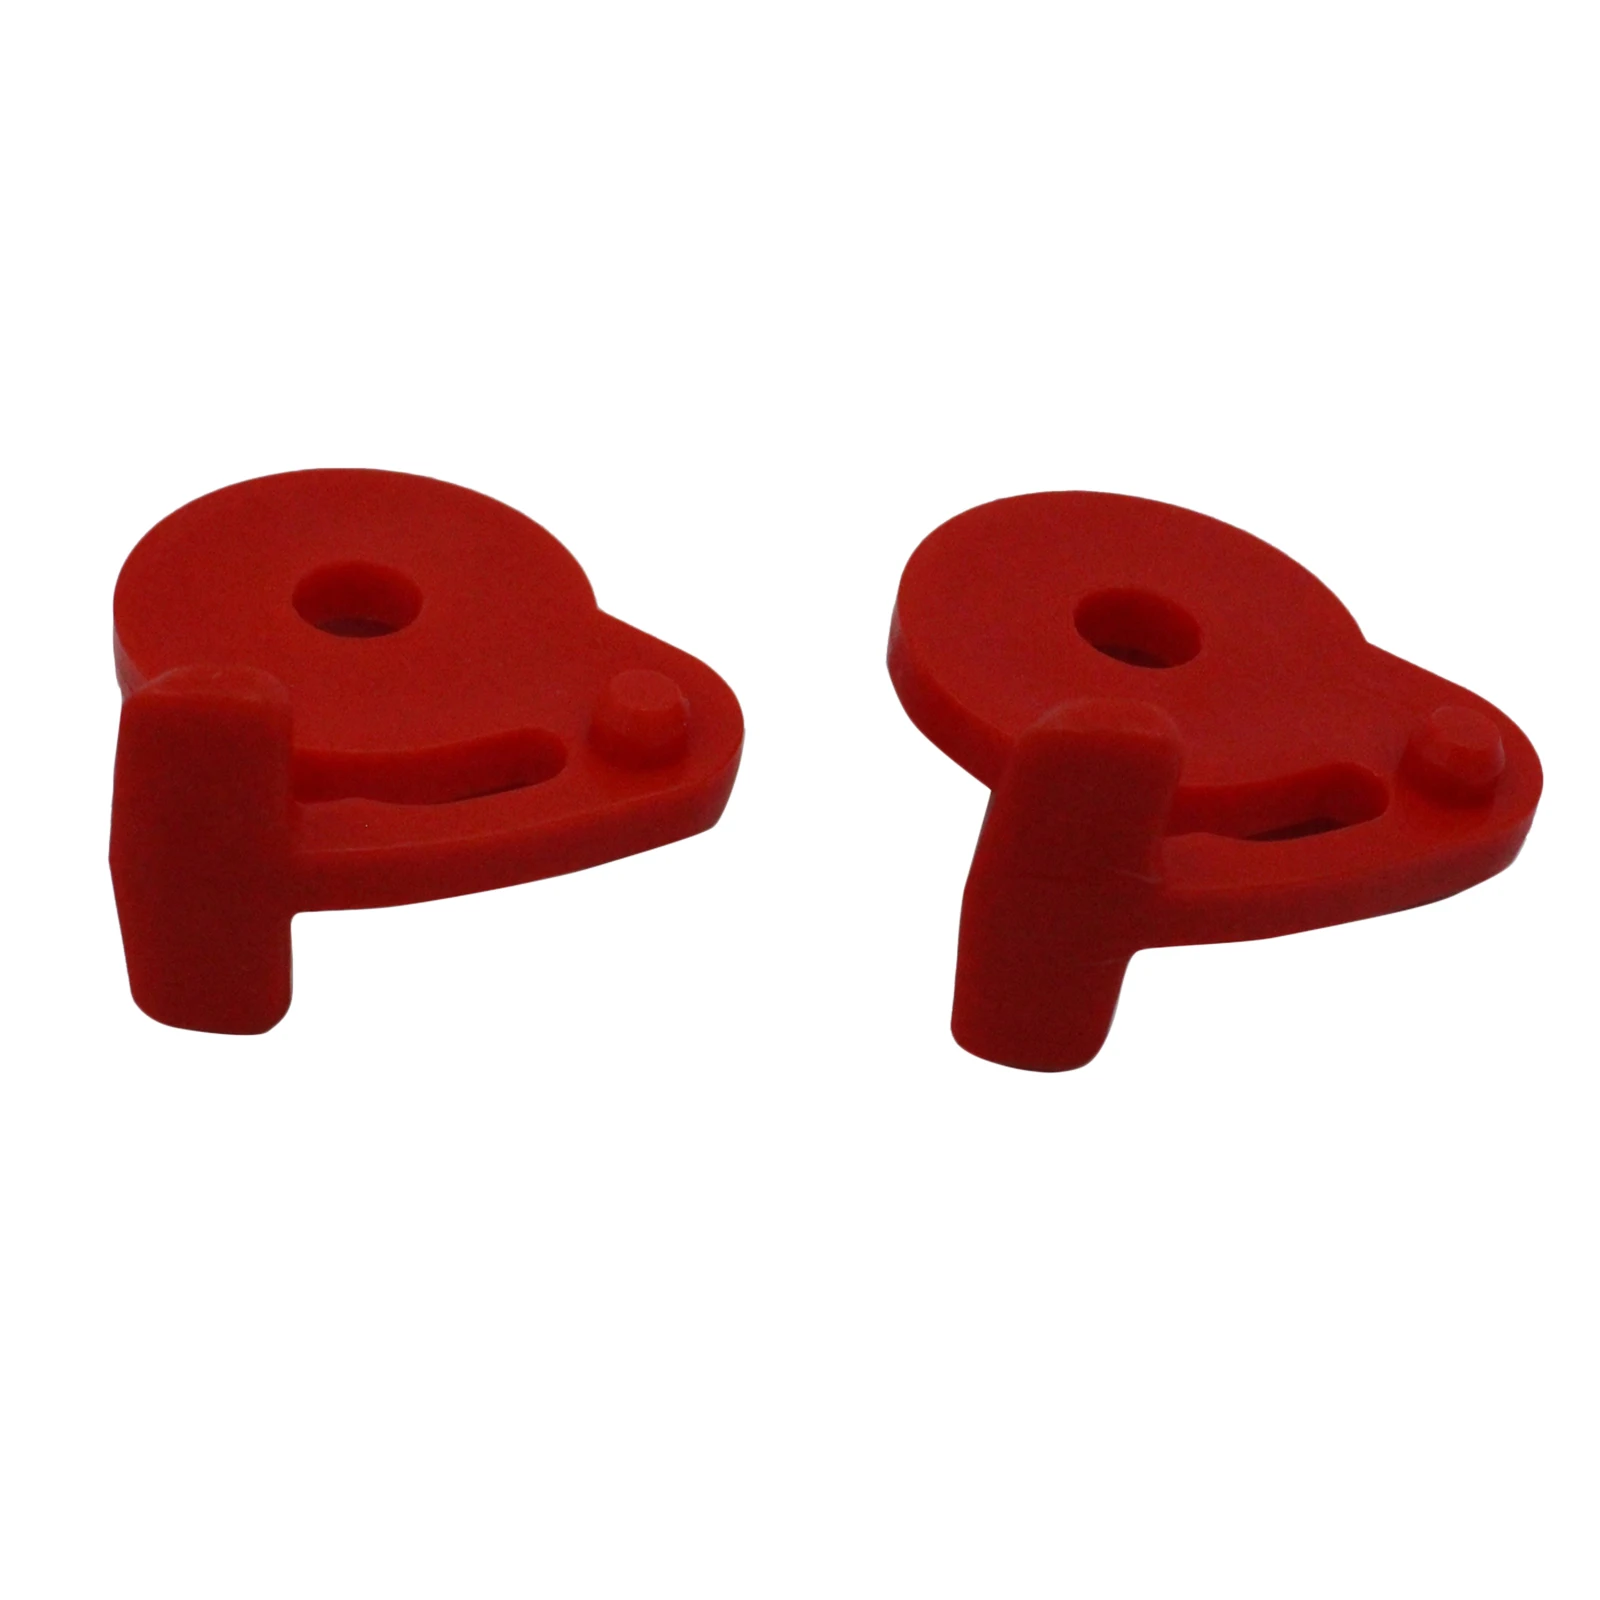 2x Red Plastic Side Wall Lockout Fuses Basic Replacement for STEMA Basic Series